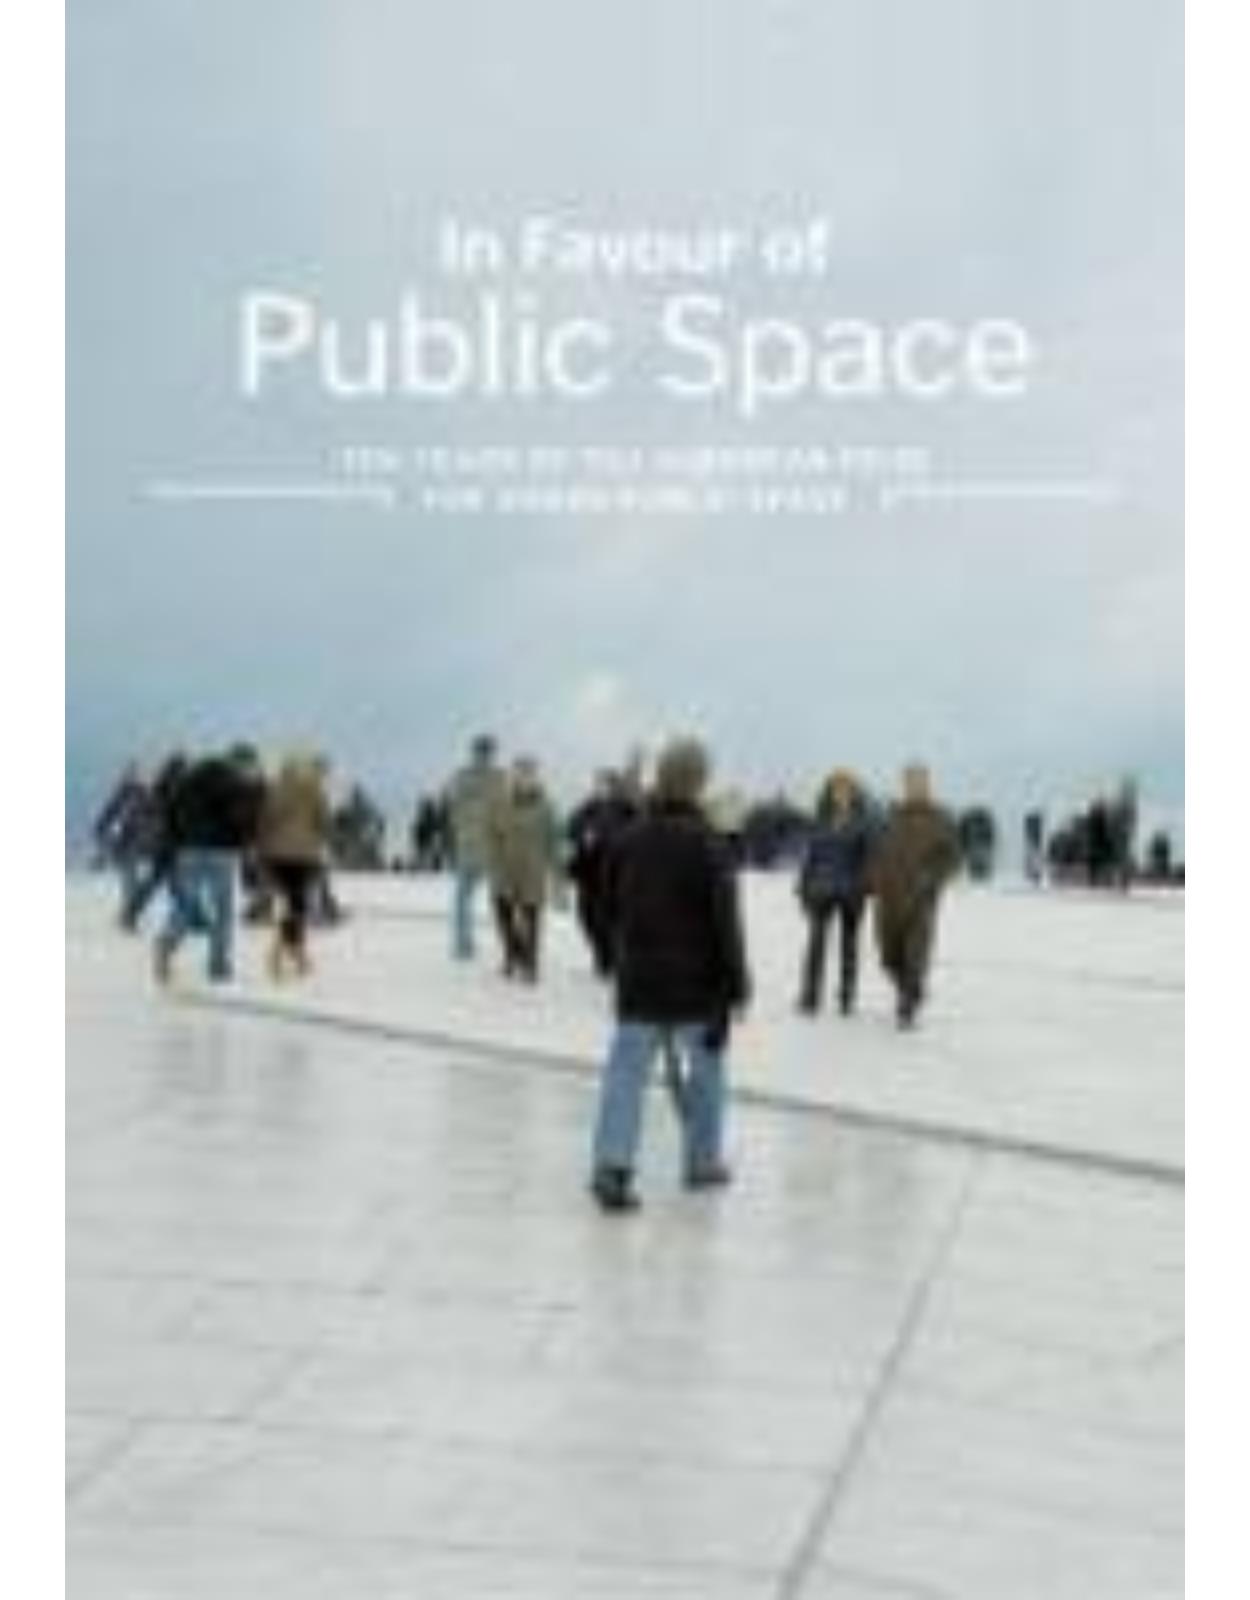 In Favour of Public Space: Ten Years of the European Prize for Urban Public Space